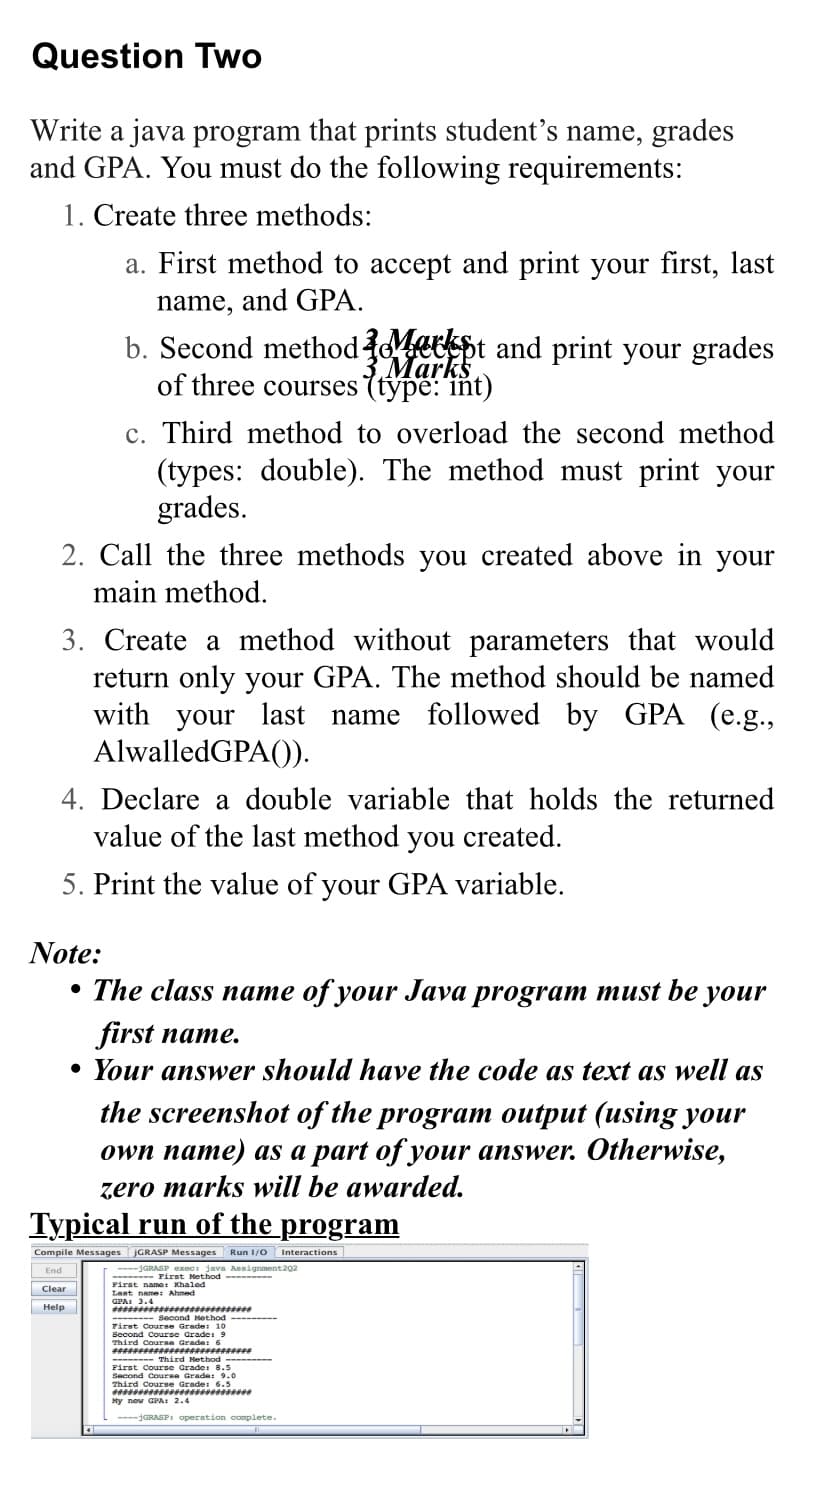 Question Two
Write a java program that prints student's name, grades
and GPA. You must do the following requirements:
1. Create three methods:
a. First method to accept and print your first, last
name, and GPA.
2. Call the three methods you created above in your
main method.
b. Second method Markt and print your grades
Marks
of three courses (type: int)
3. Create a method without parameters that would
return only your GPA. The method should be named
with your last name followed by GPA (e.g.,
AlwalledGPA()).
Note:
c. Third method to overload the second method
(types: double). The method must print your
grades.
4. Declare a double variable that holds the returned
value of the last method you created.
5. Print the value of your GPA variable.
Help
●
The class name of your Java program must be your
first name.
• Your answer should have the code as text as well as
the screenshot of the program output (using your
own name) as a part of your answer. Otherwise,
zero marks will be awarded.
Typical run of the program
Compile Messages jGRASP Messages Run 1/0 Interactions
End
----GRASP exec: java Assignment 202
-------- First Method➖➖➖➖➖➖➖➖
First name: Khaled
Last name: Ahmed
Clear
Pasense.*********
-------- Second Method ---------
First Course Grade: 10
Second Course Grade: 9
Third Course Grade: 6
**************************
➖➖➖➖➖➖➖➖ Third Method
First Course Grade: 8.5
Second Course Grade: 9.0
Third Course Grade: 6.5
**********▪▪▪▪▪▪▪▪▪▪*******
My new GPA: 2.4
----GRASP: operation complete.